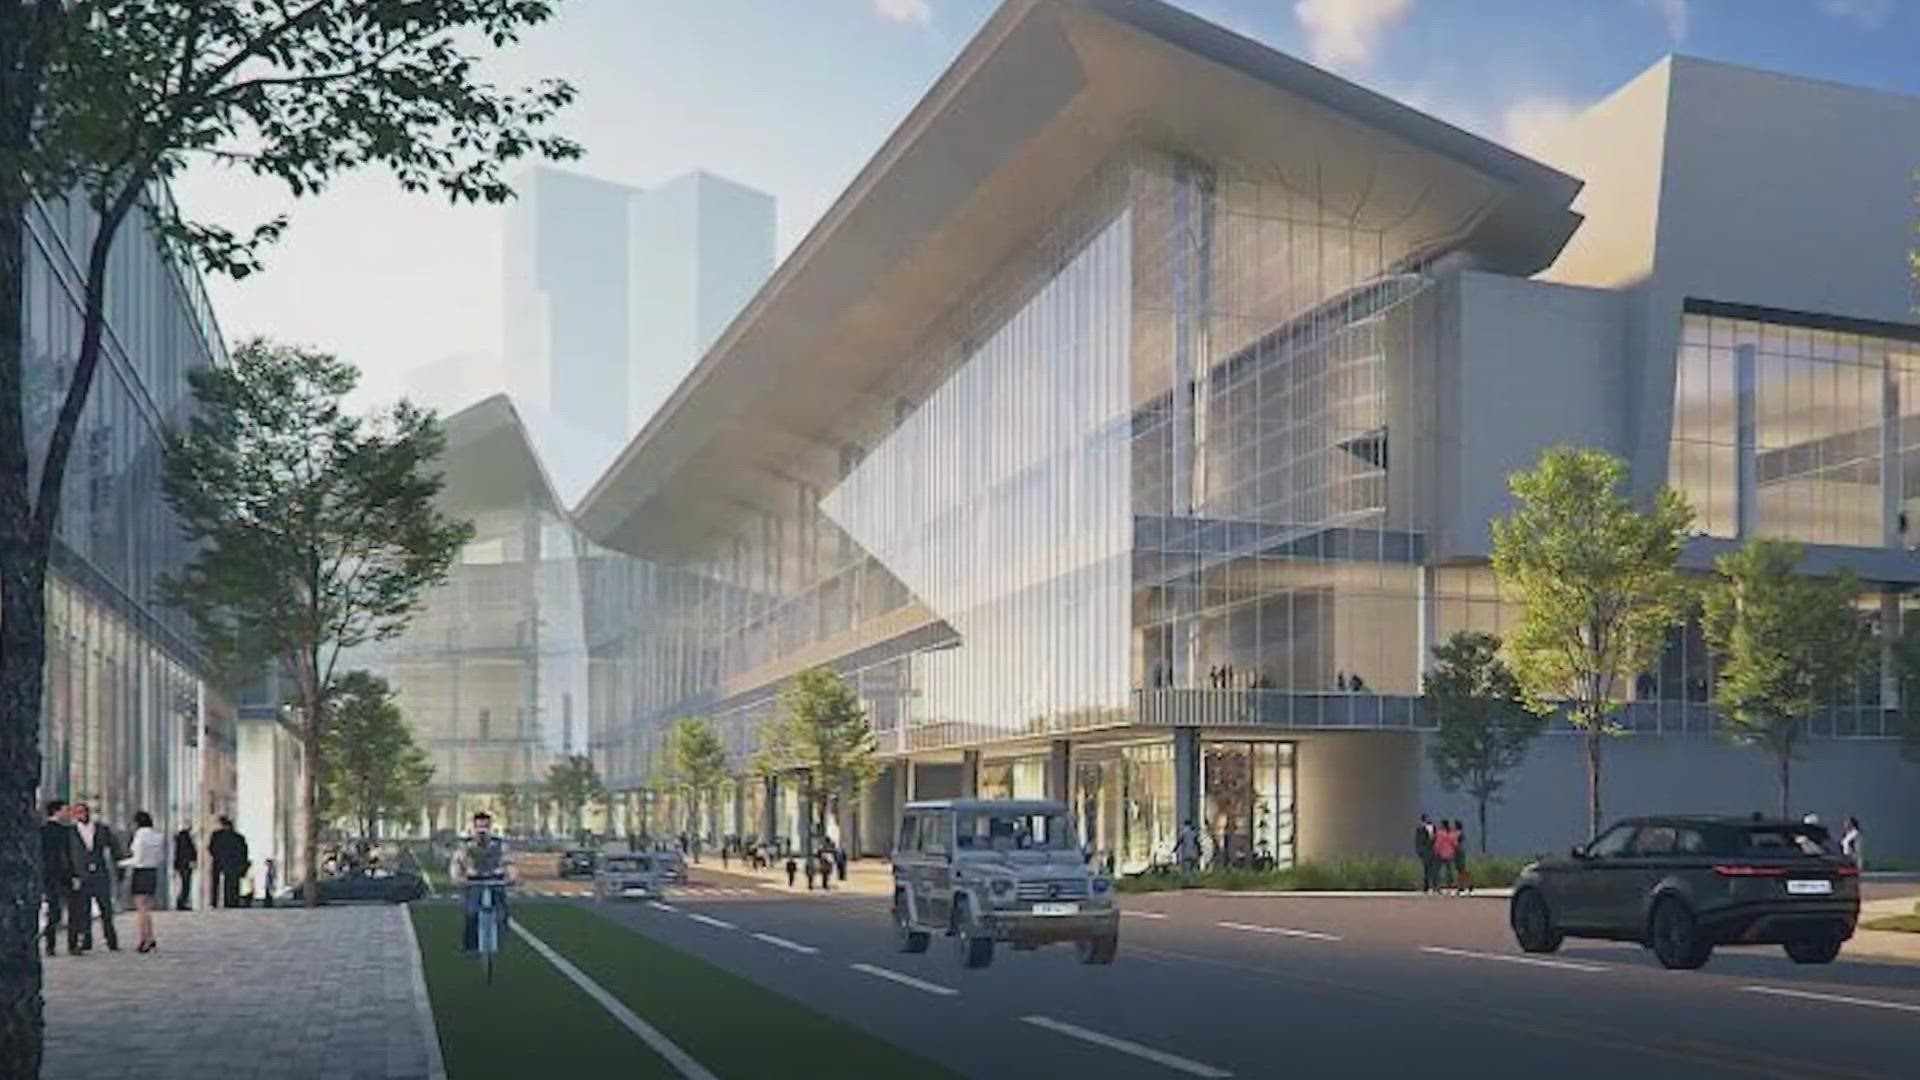 Dallas' new convention center is expected to be completed by 2028.